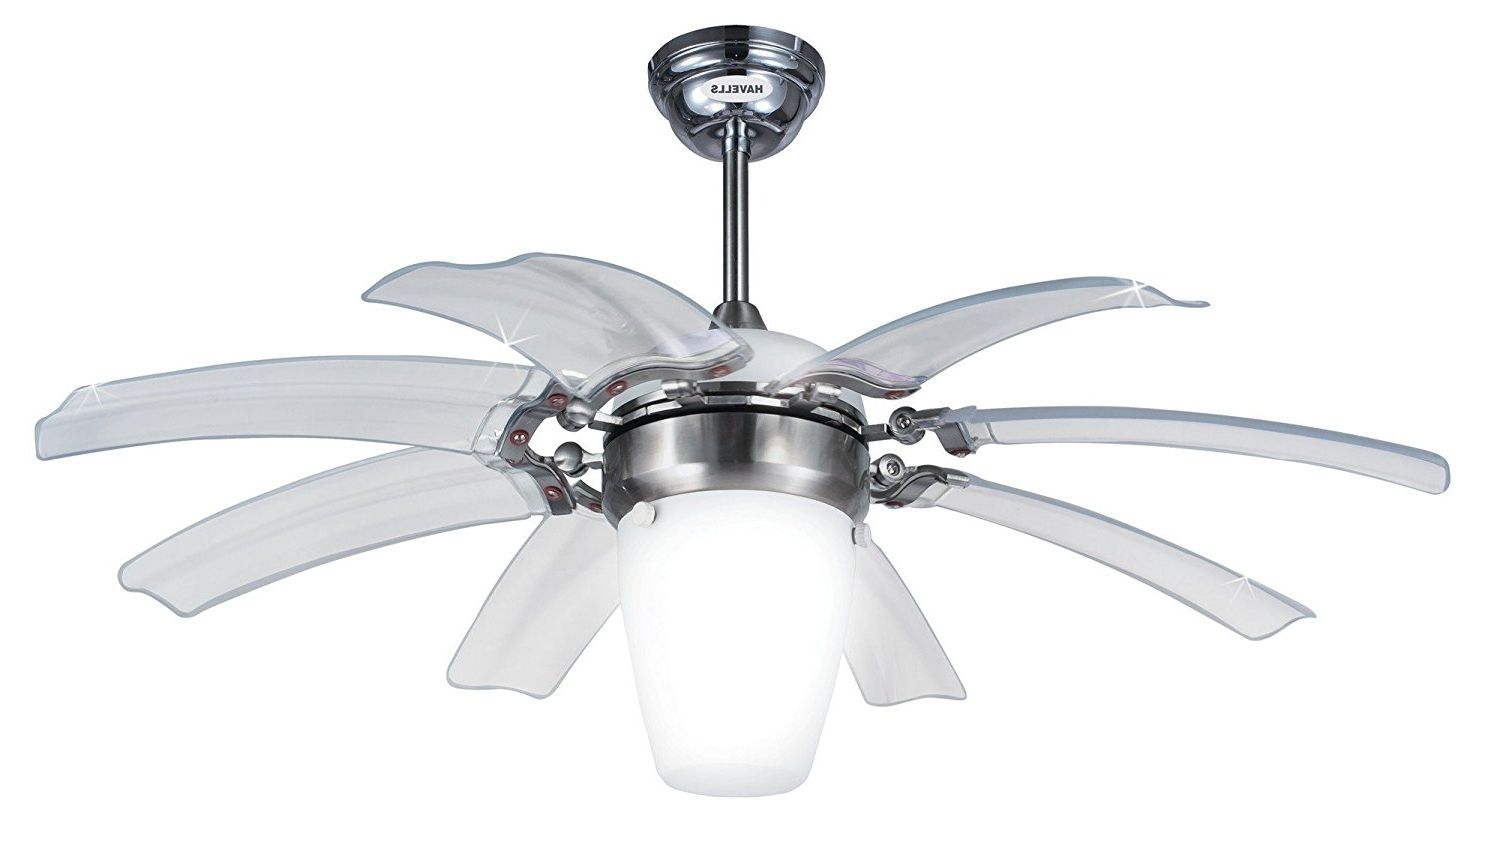 Ceiling Fan: Recomended Amazon Ceiling Fans For Home Hunter Ceiling Regarding Most Recent Outdoor Ceiling Fans At Amazon (View 18 of 20)